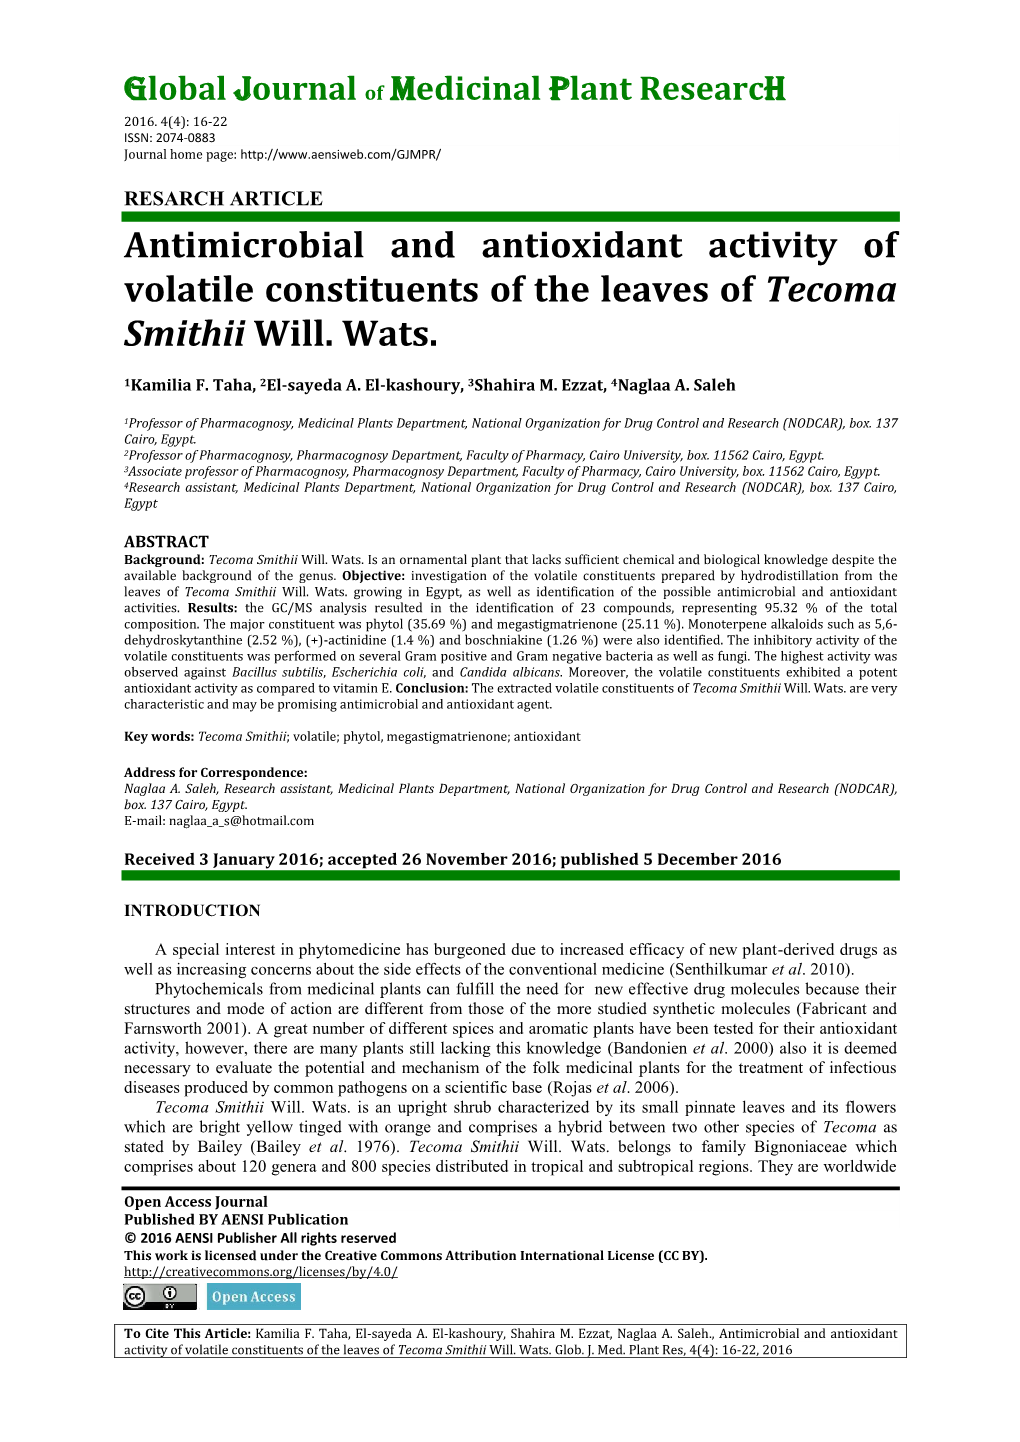 Antimicrobial and Antioxidant Activity of Volatile Constituents of the Leaves of Tecoma